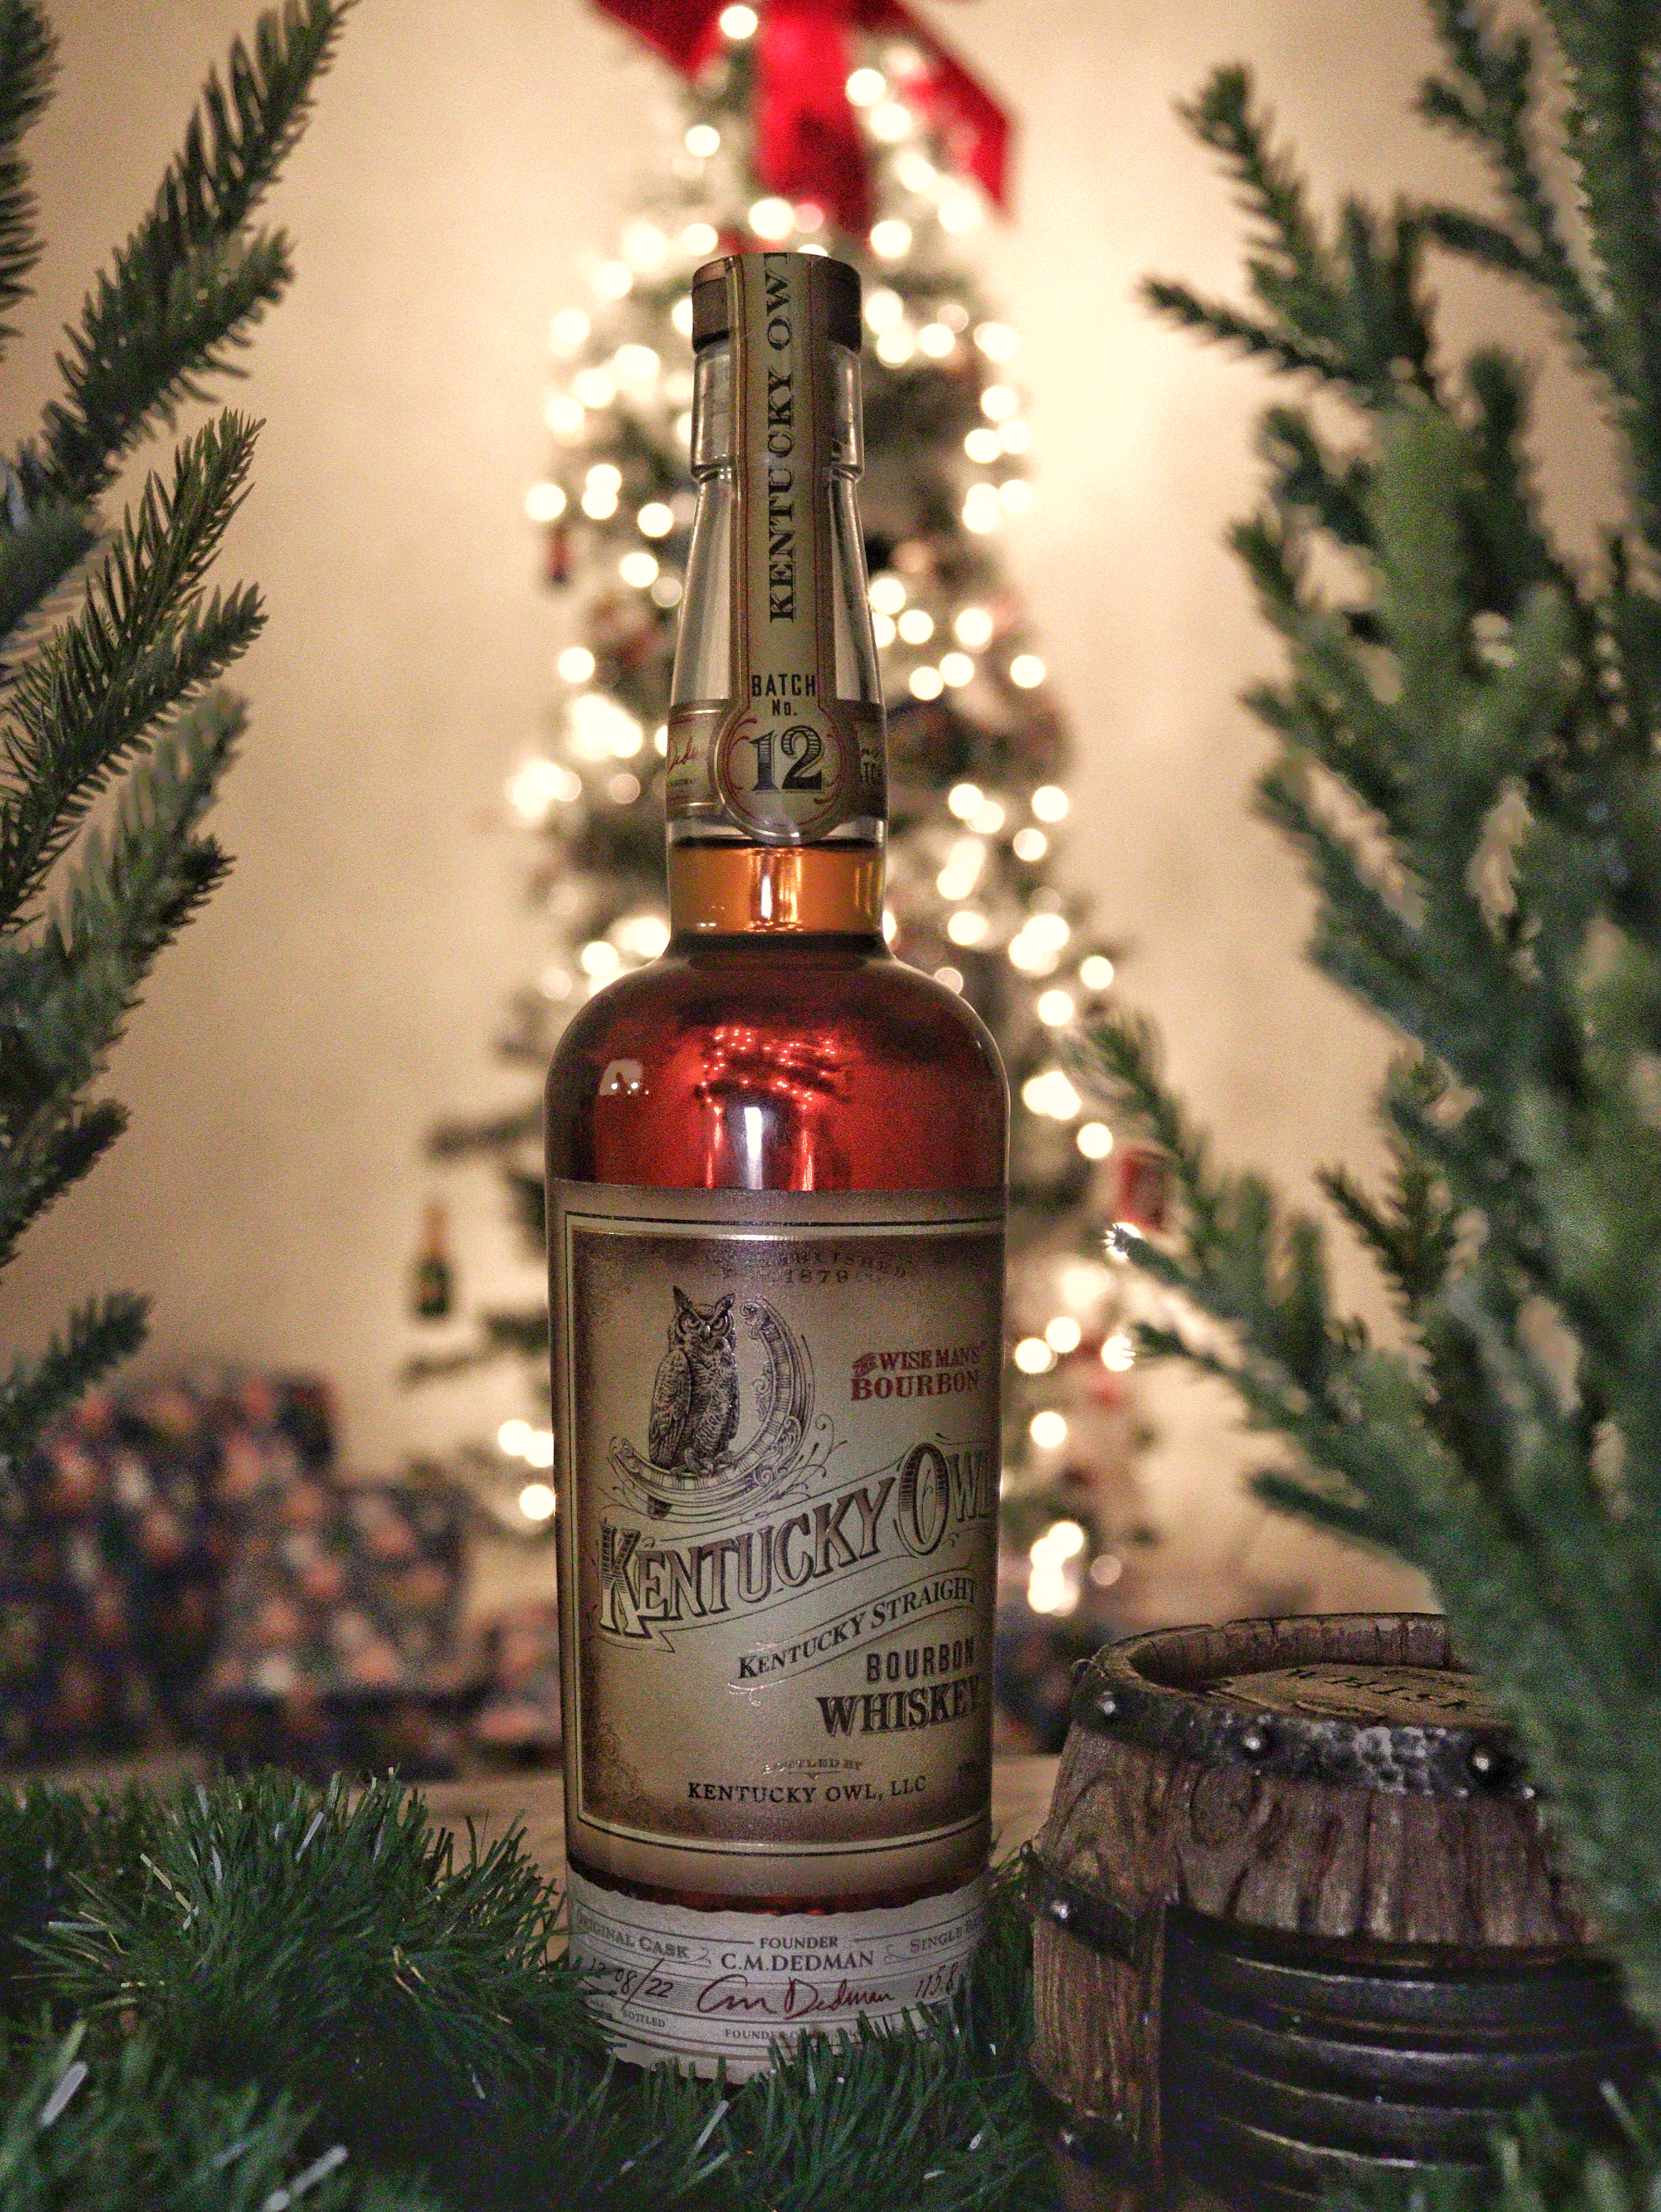 Finding Kentucky Owl Batch 12 By The Tree is Good Right?